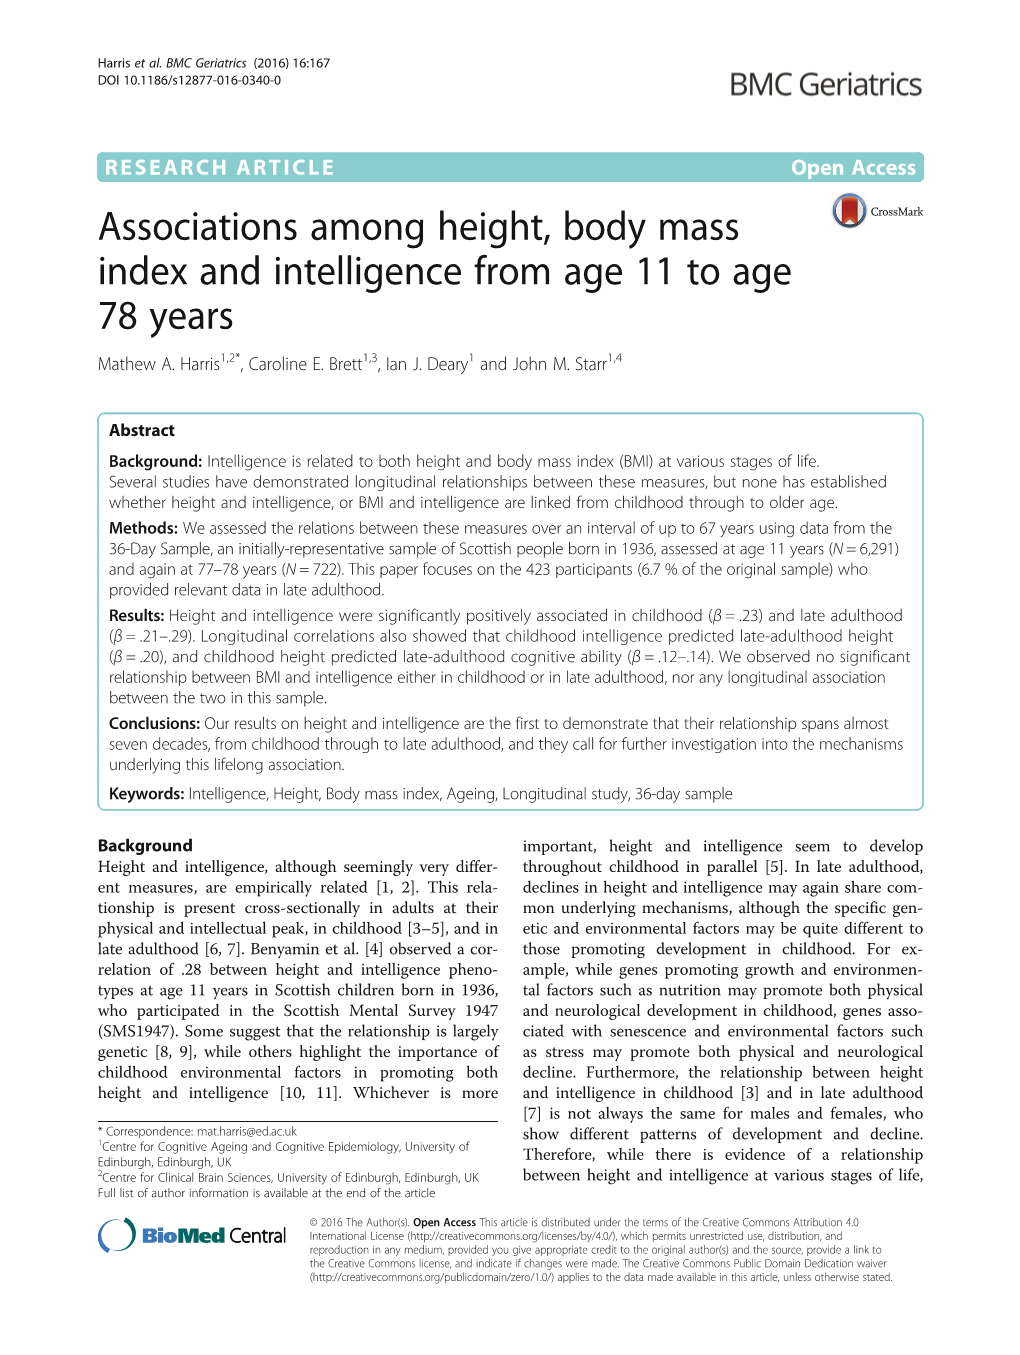 Associations Among Height, Body Mass Index and Intelligence from Age 11 to Age 78 Years Mathew A